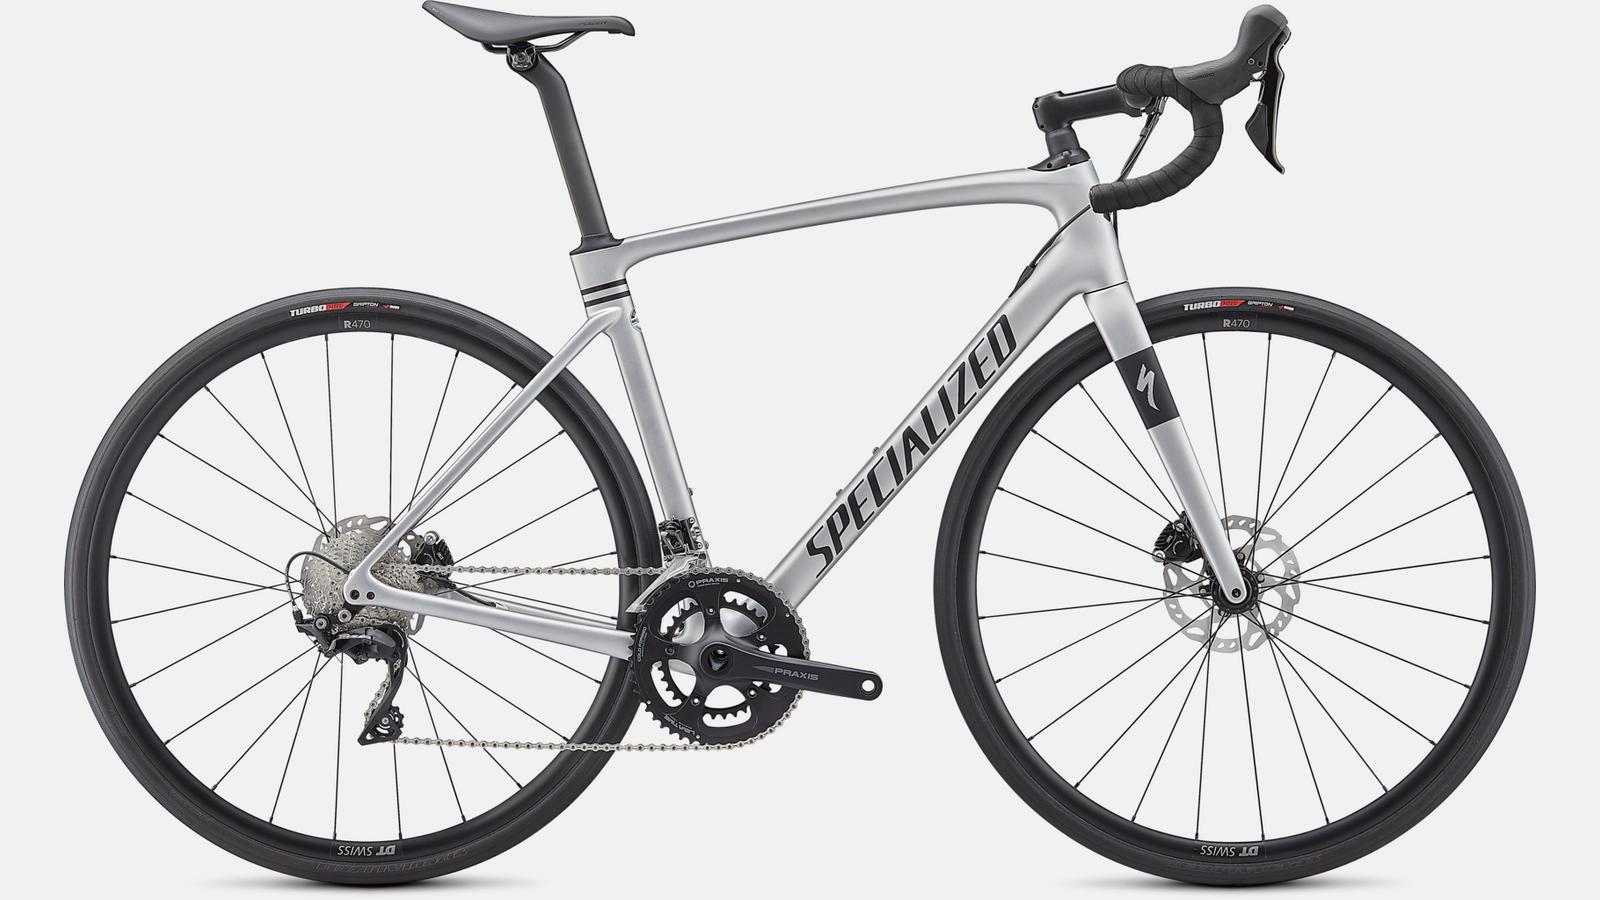 Paint for 2021 Specialized Roubaix Sport - Satin Flake Silver